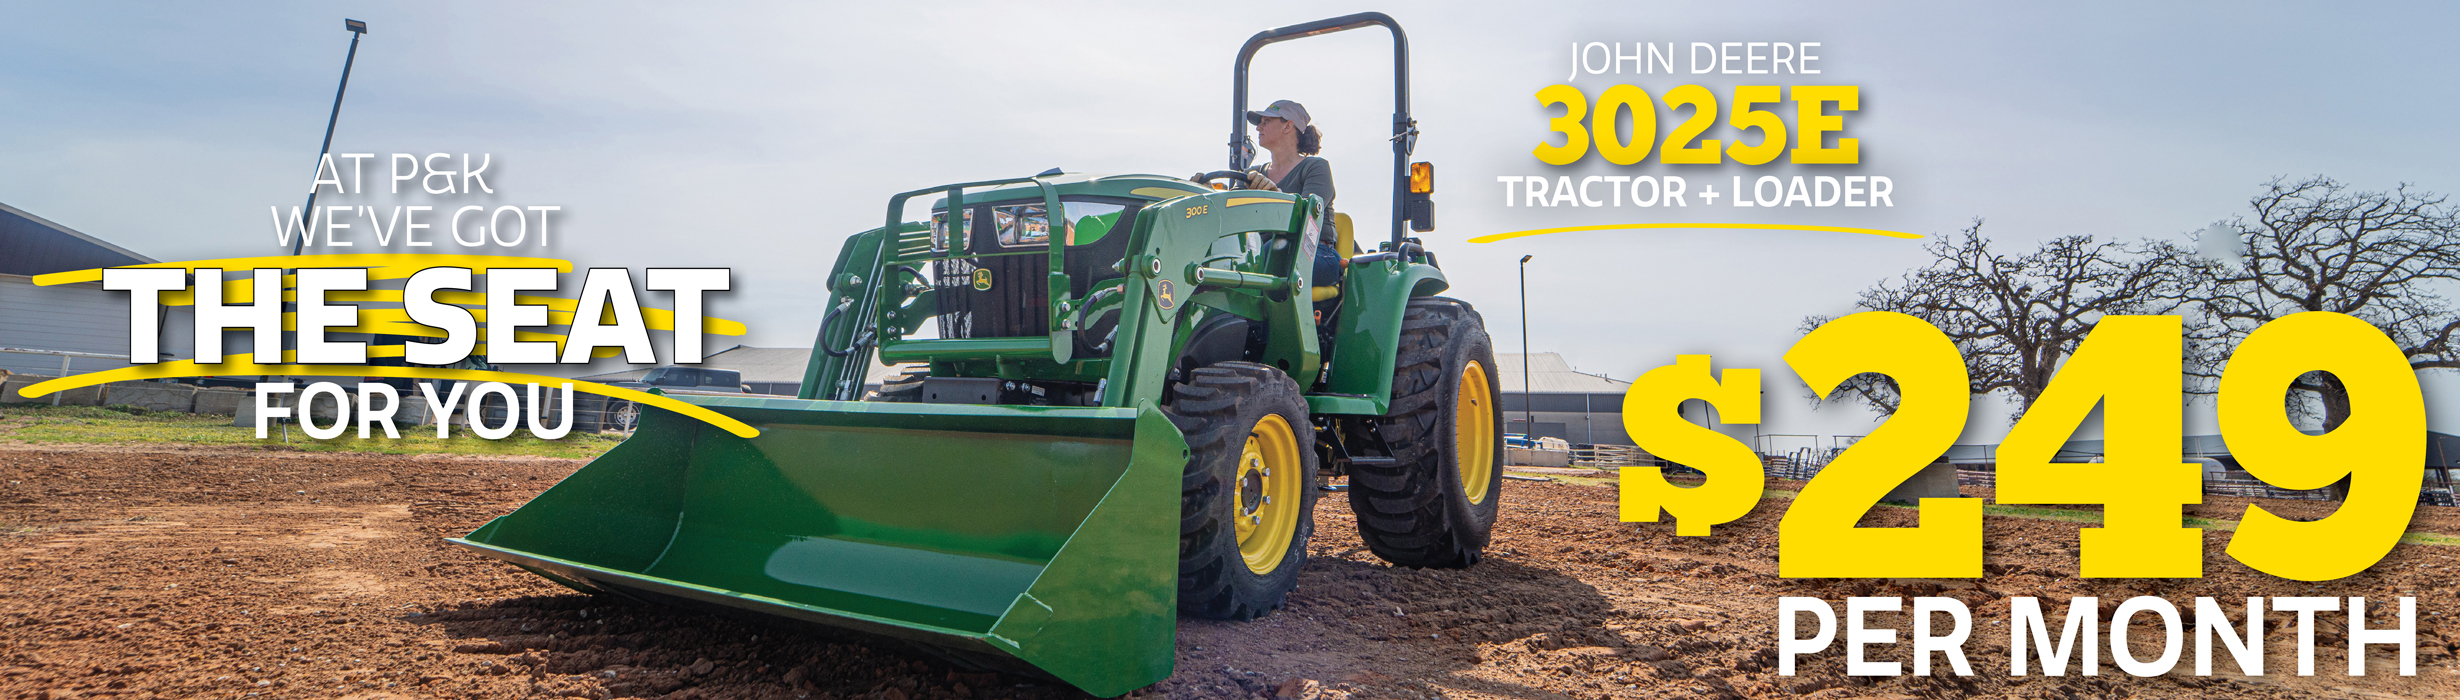 Get the John Deere 3025E Tractor + Loader for just $249 per month!